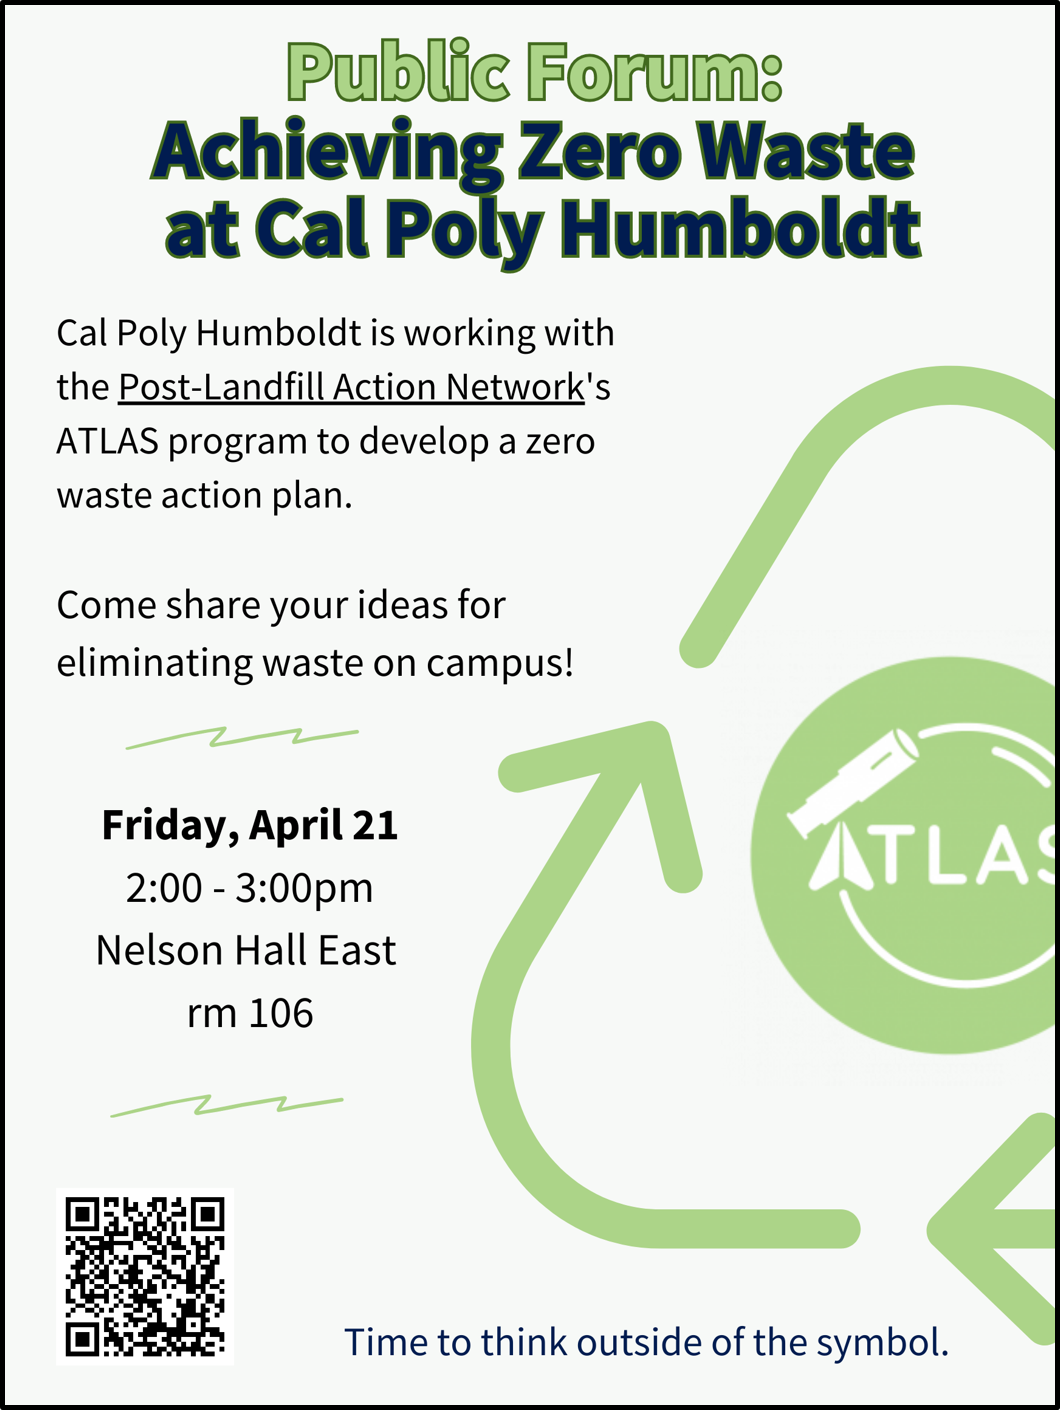 Friday, April 21 2-3pm in Nelson Hall East rm 106: public forum on achieving Zero Waste at Cal Poly Humboldt. Come share your ideas for eliminating waste on campus!